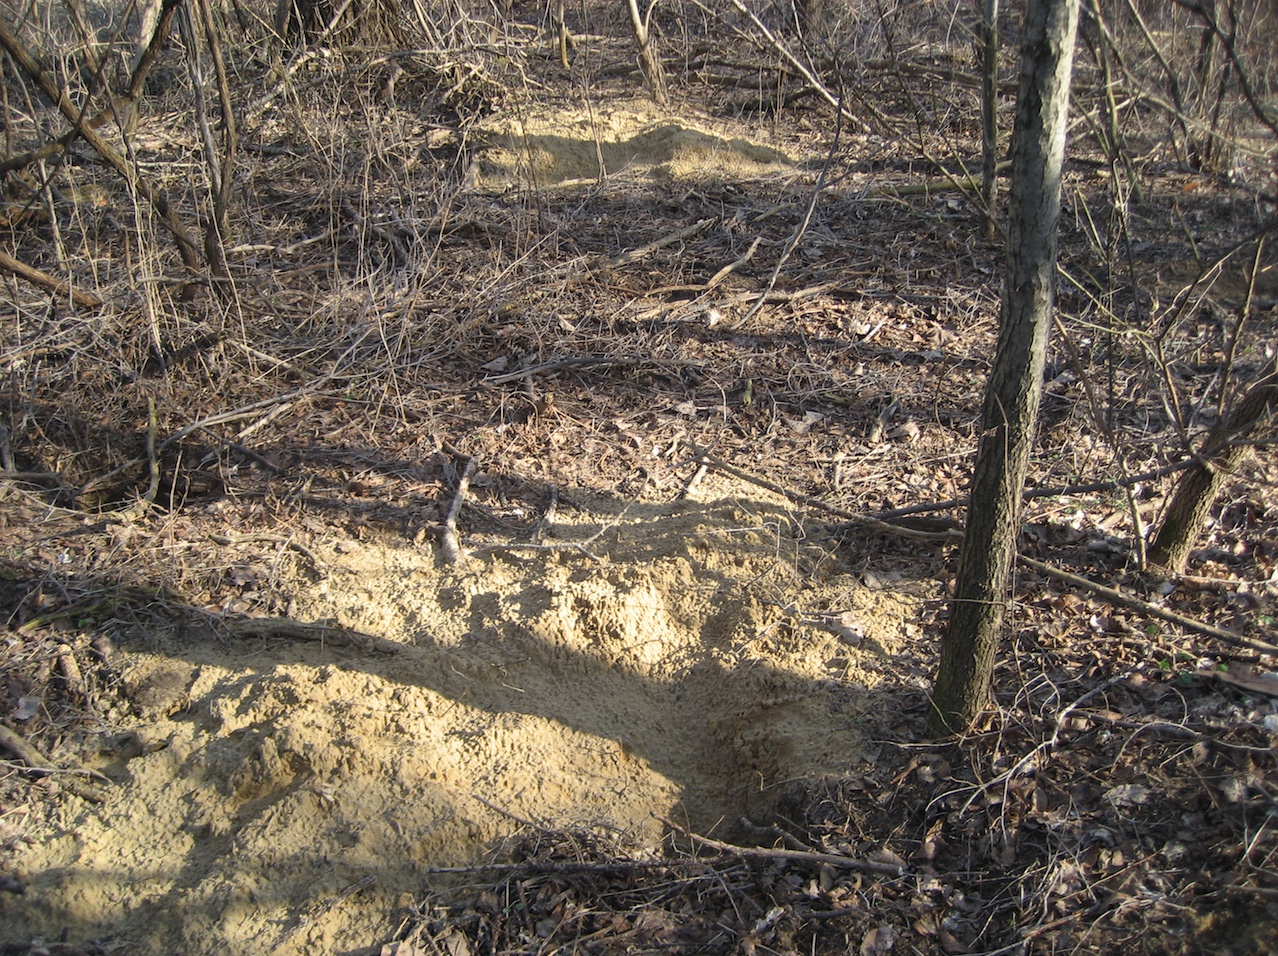 Badger burrow in the woods.